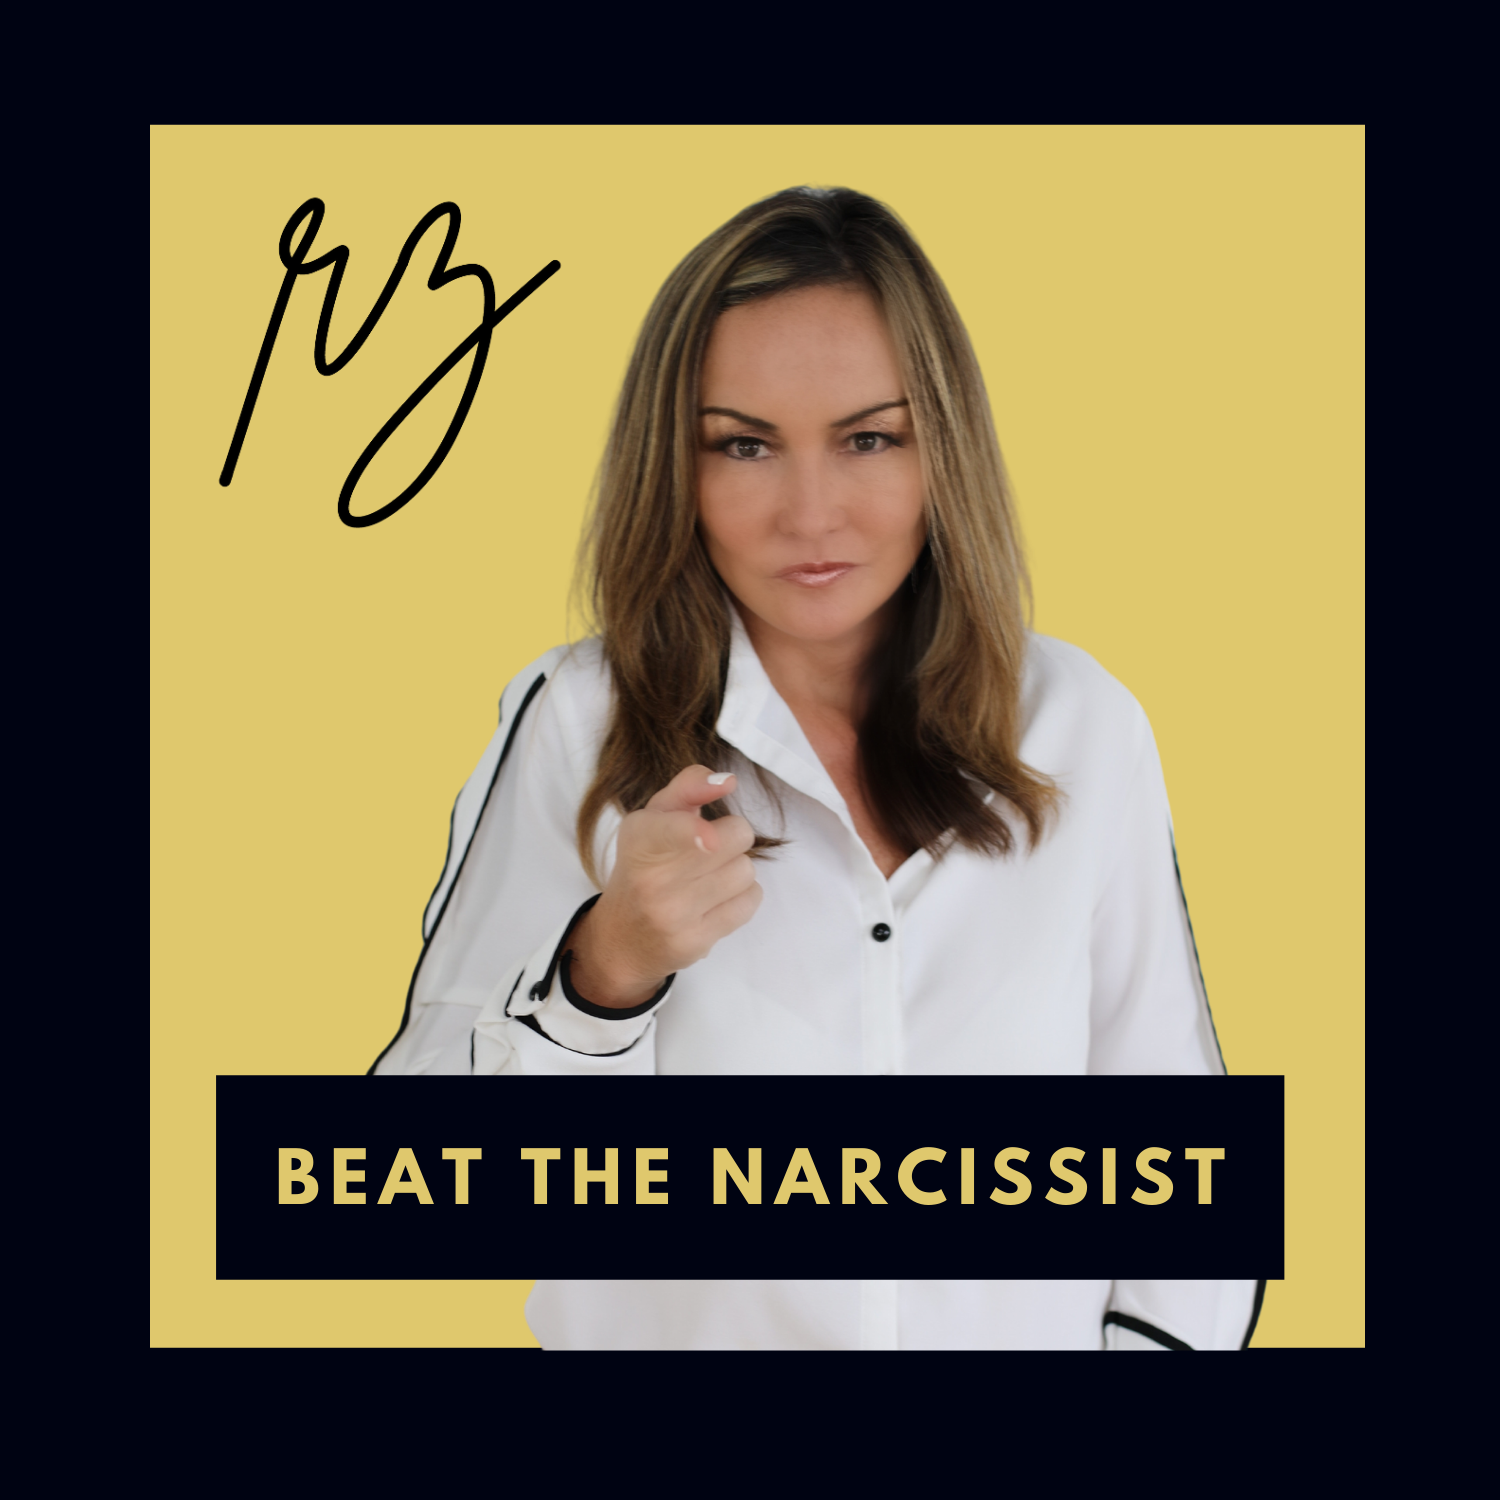 Signs You've Beat the Narcissist